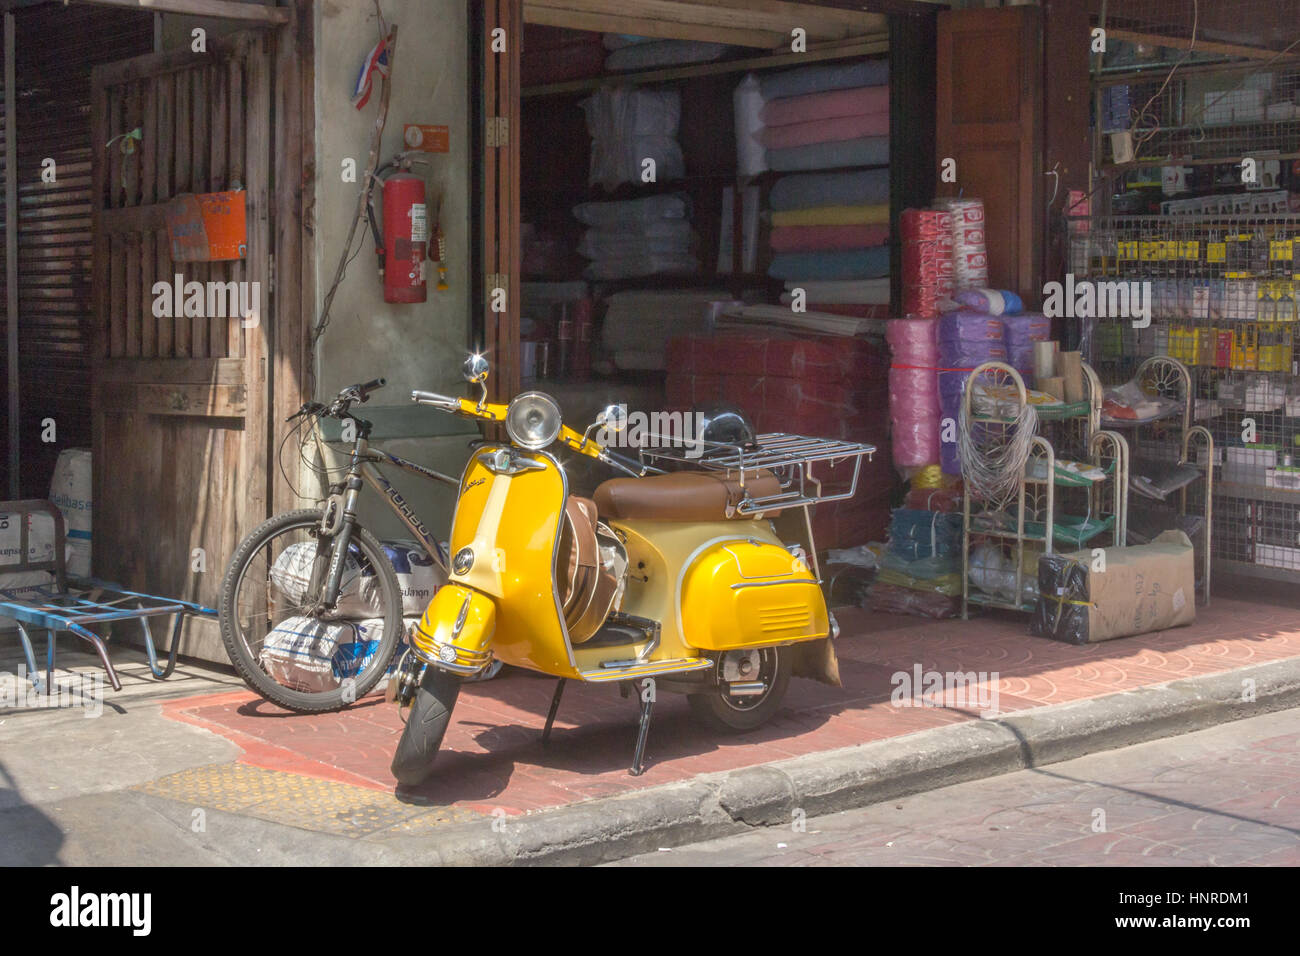 Yellow scooter parked on pavement in Chinatown, Bangkok, Thailand Stock Photo